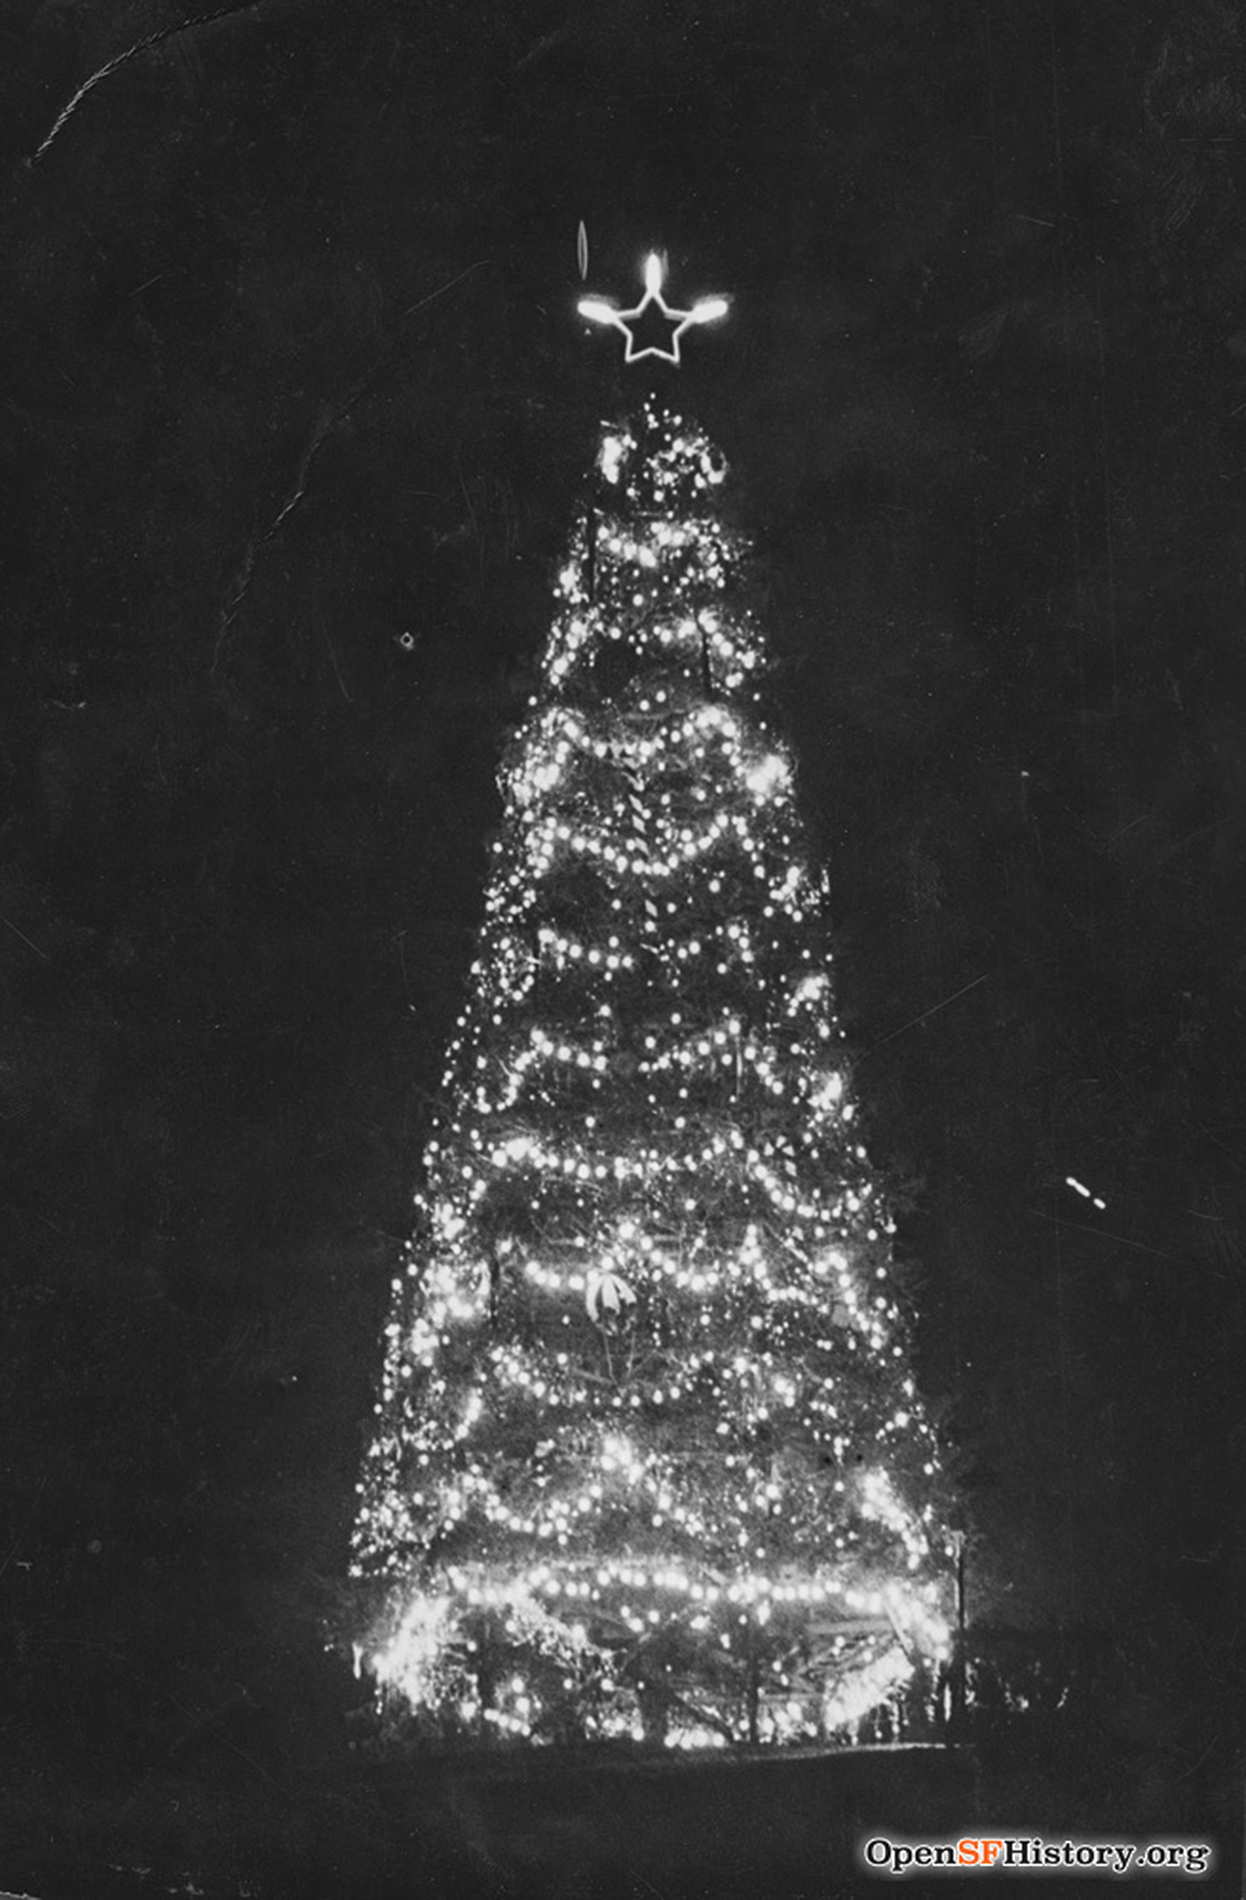 A black and white photo of a lit-up outdoor holiday tree at night.